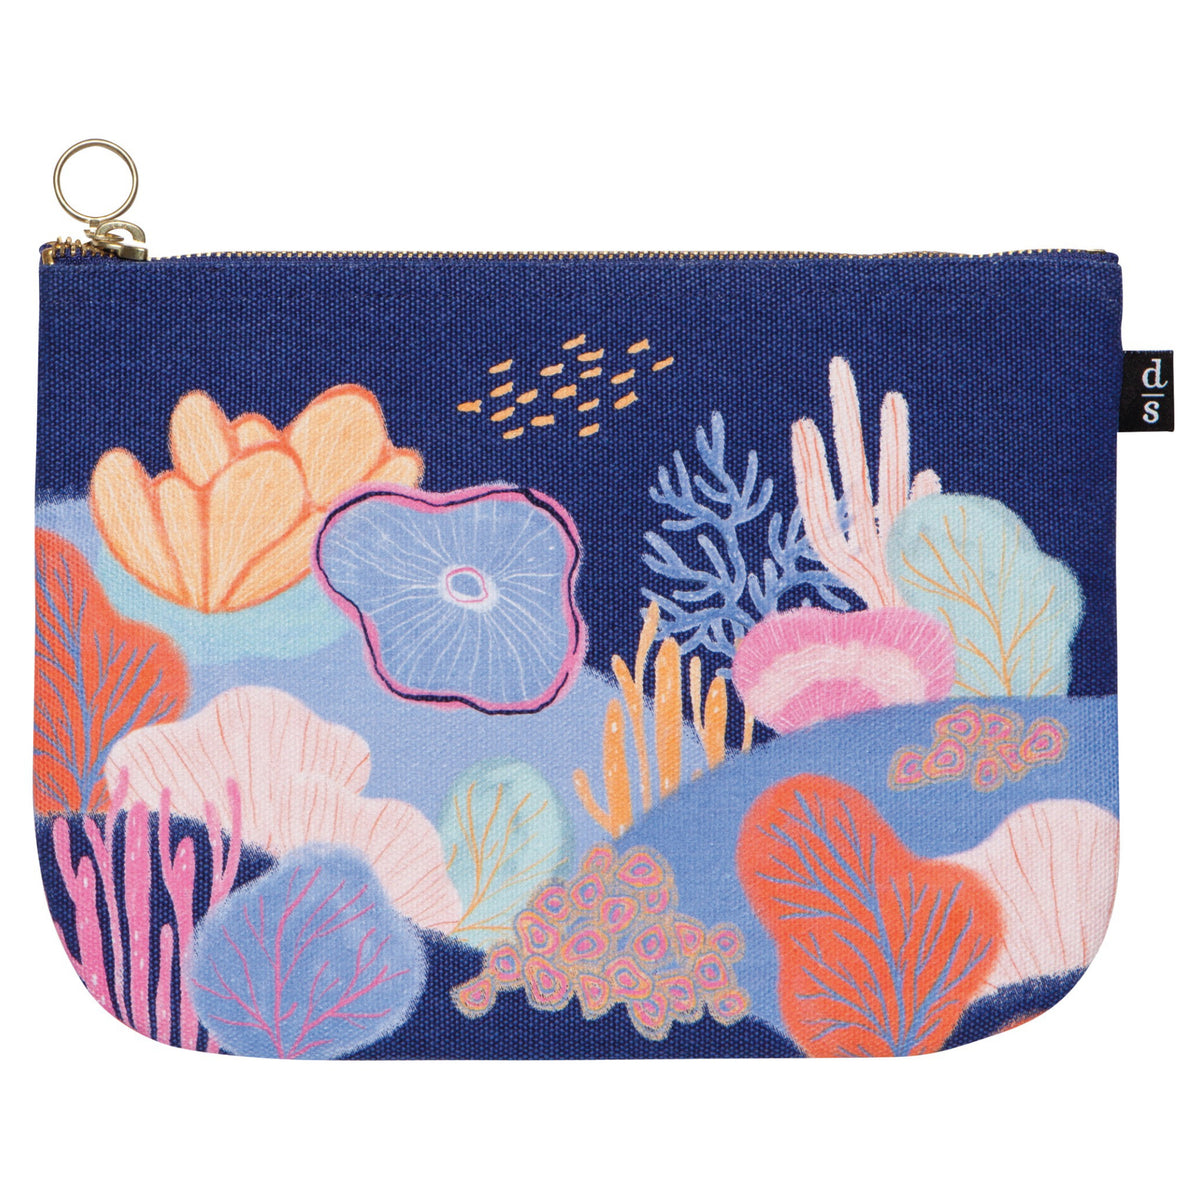 Neptune Large Zipper Pouch | Danica – Outer Layer